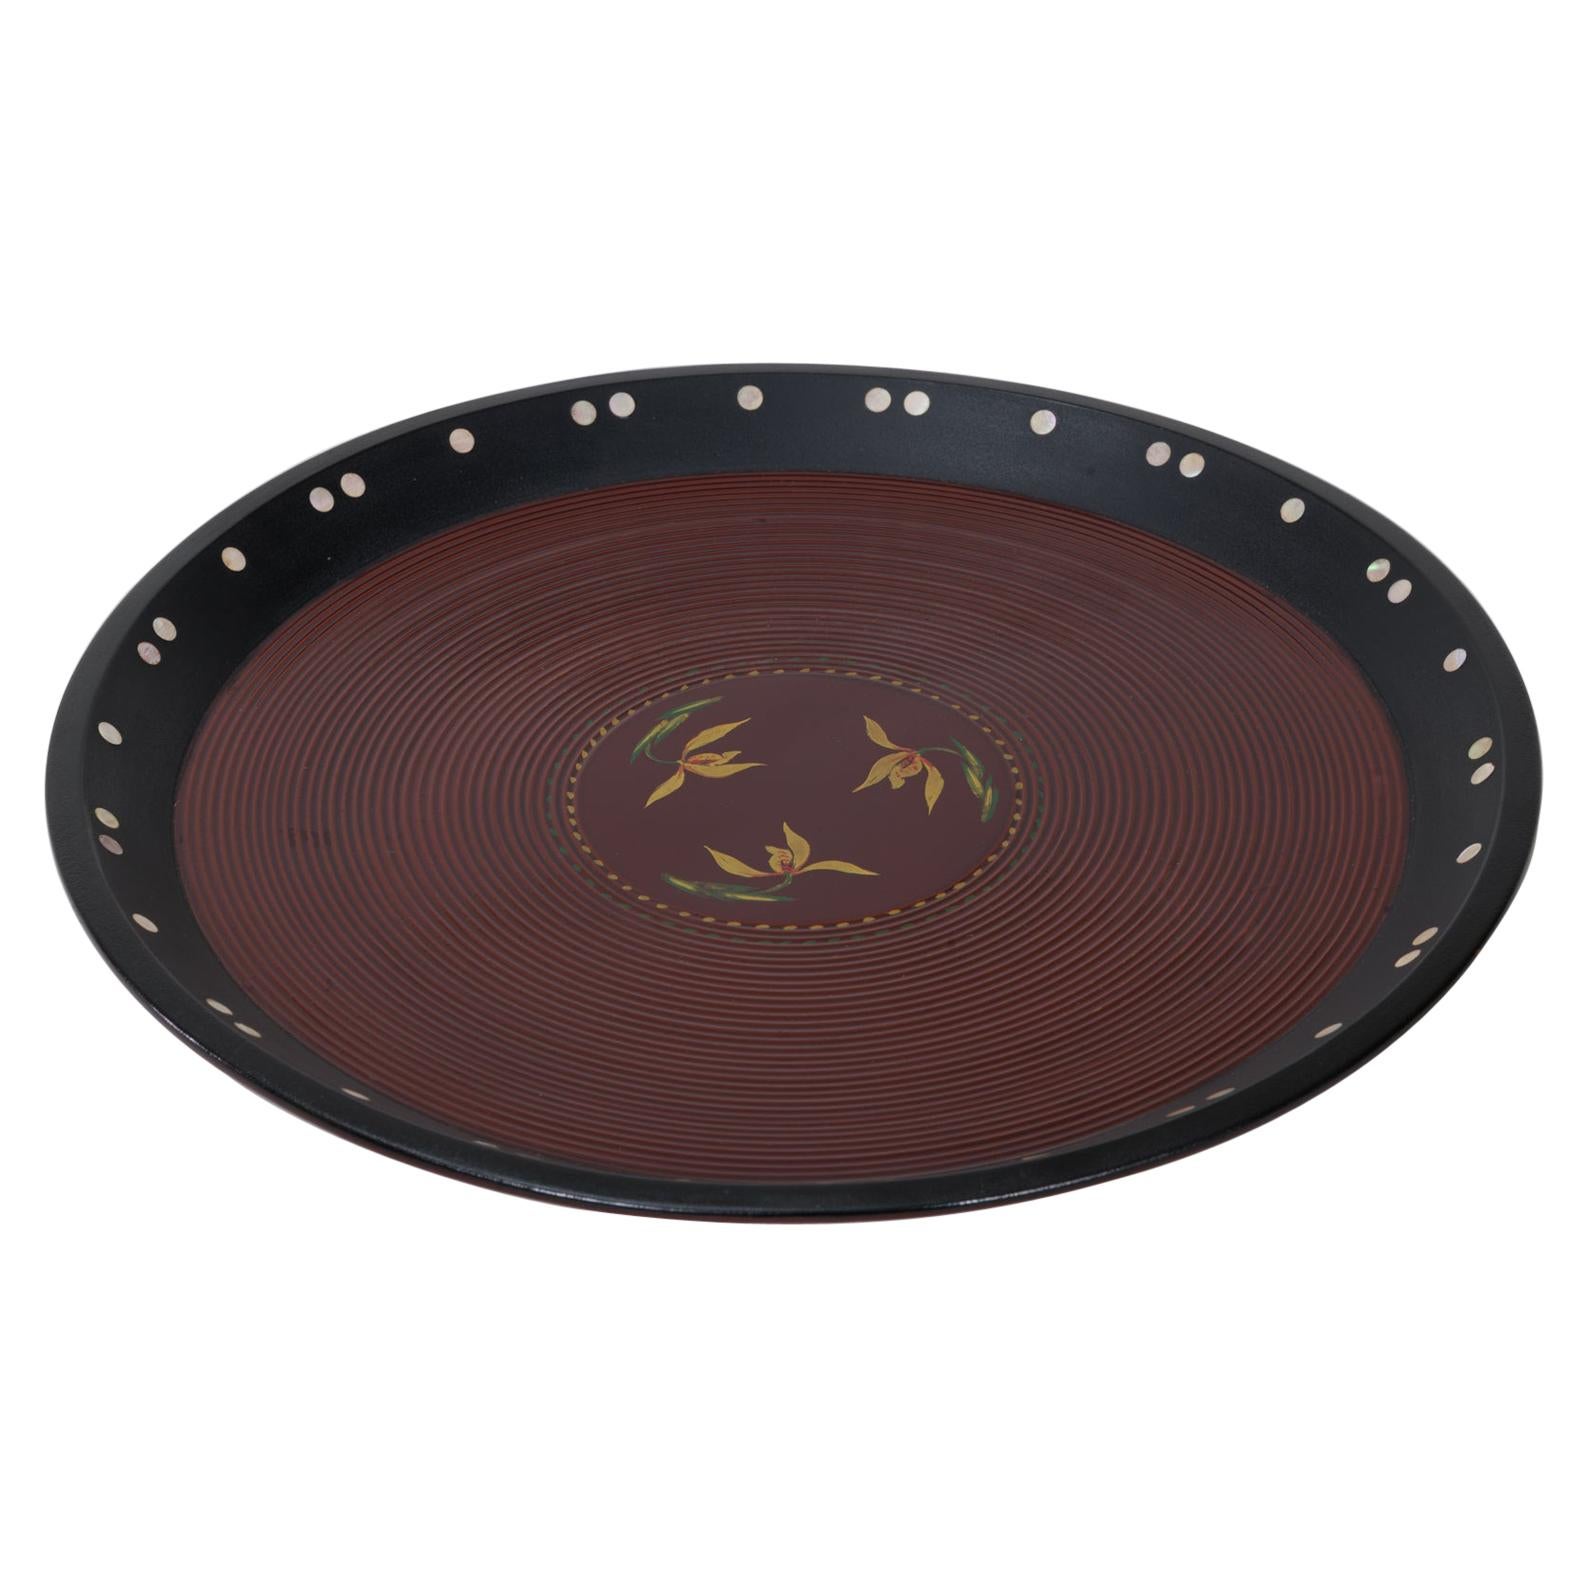 Japanese Lacquer Tray with Intricate Designs